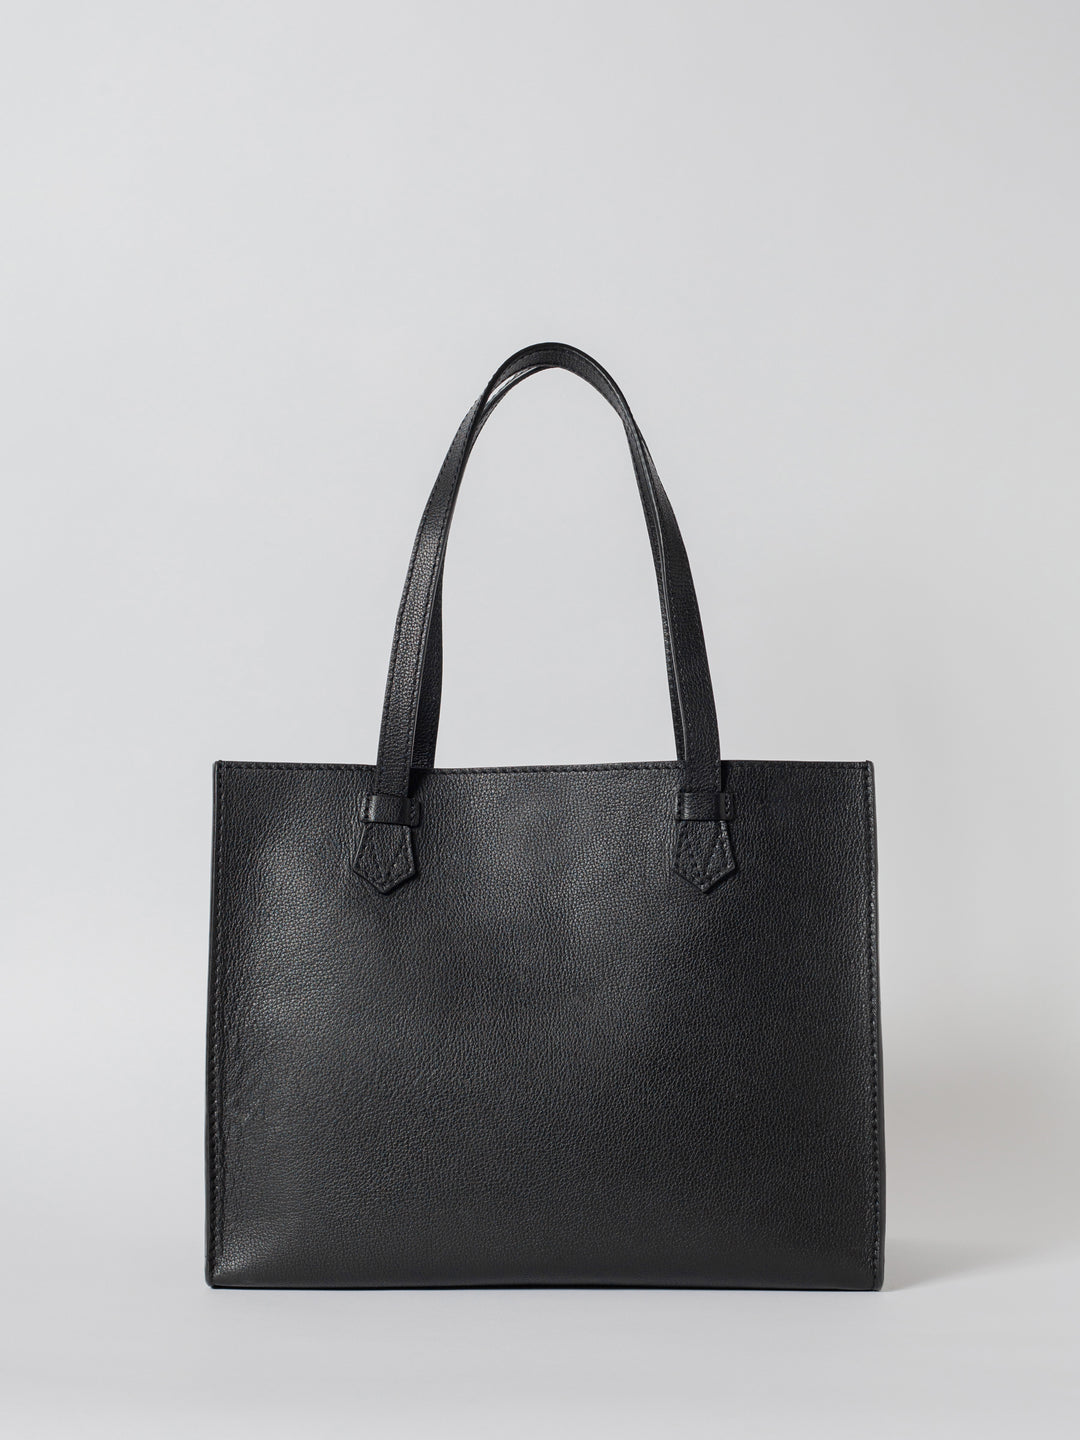 Blankens The Martha Terracotta Lining leather bag in black with terracotta lining